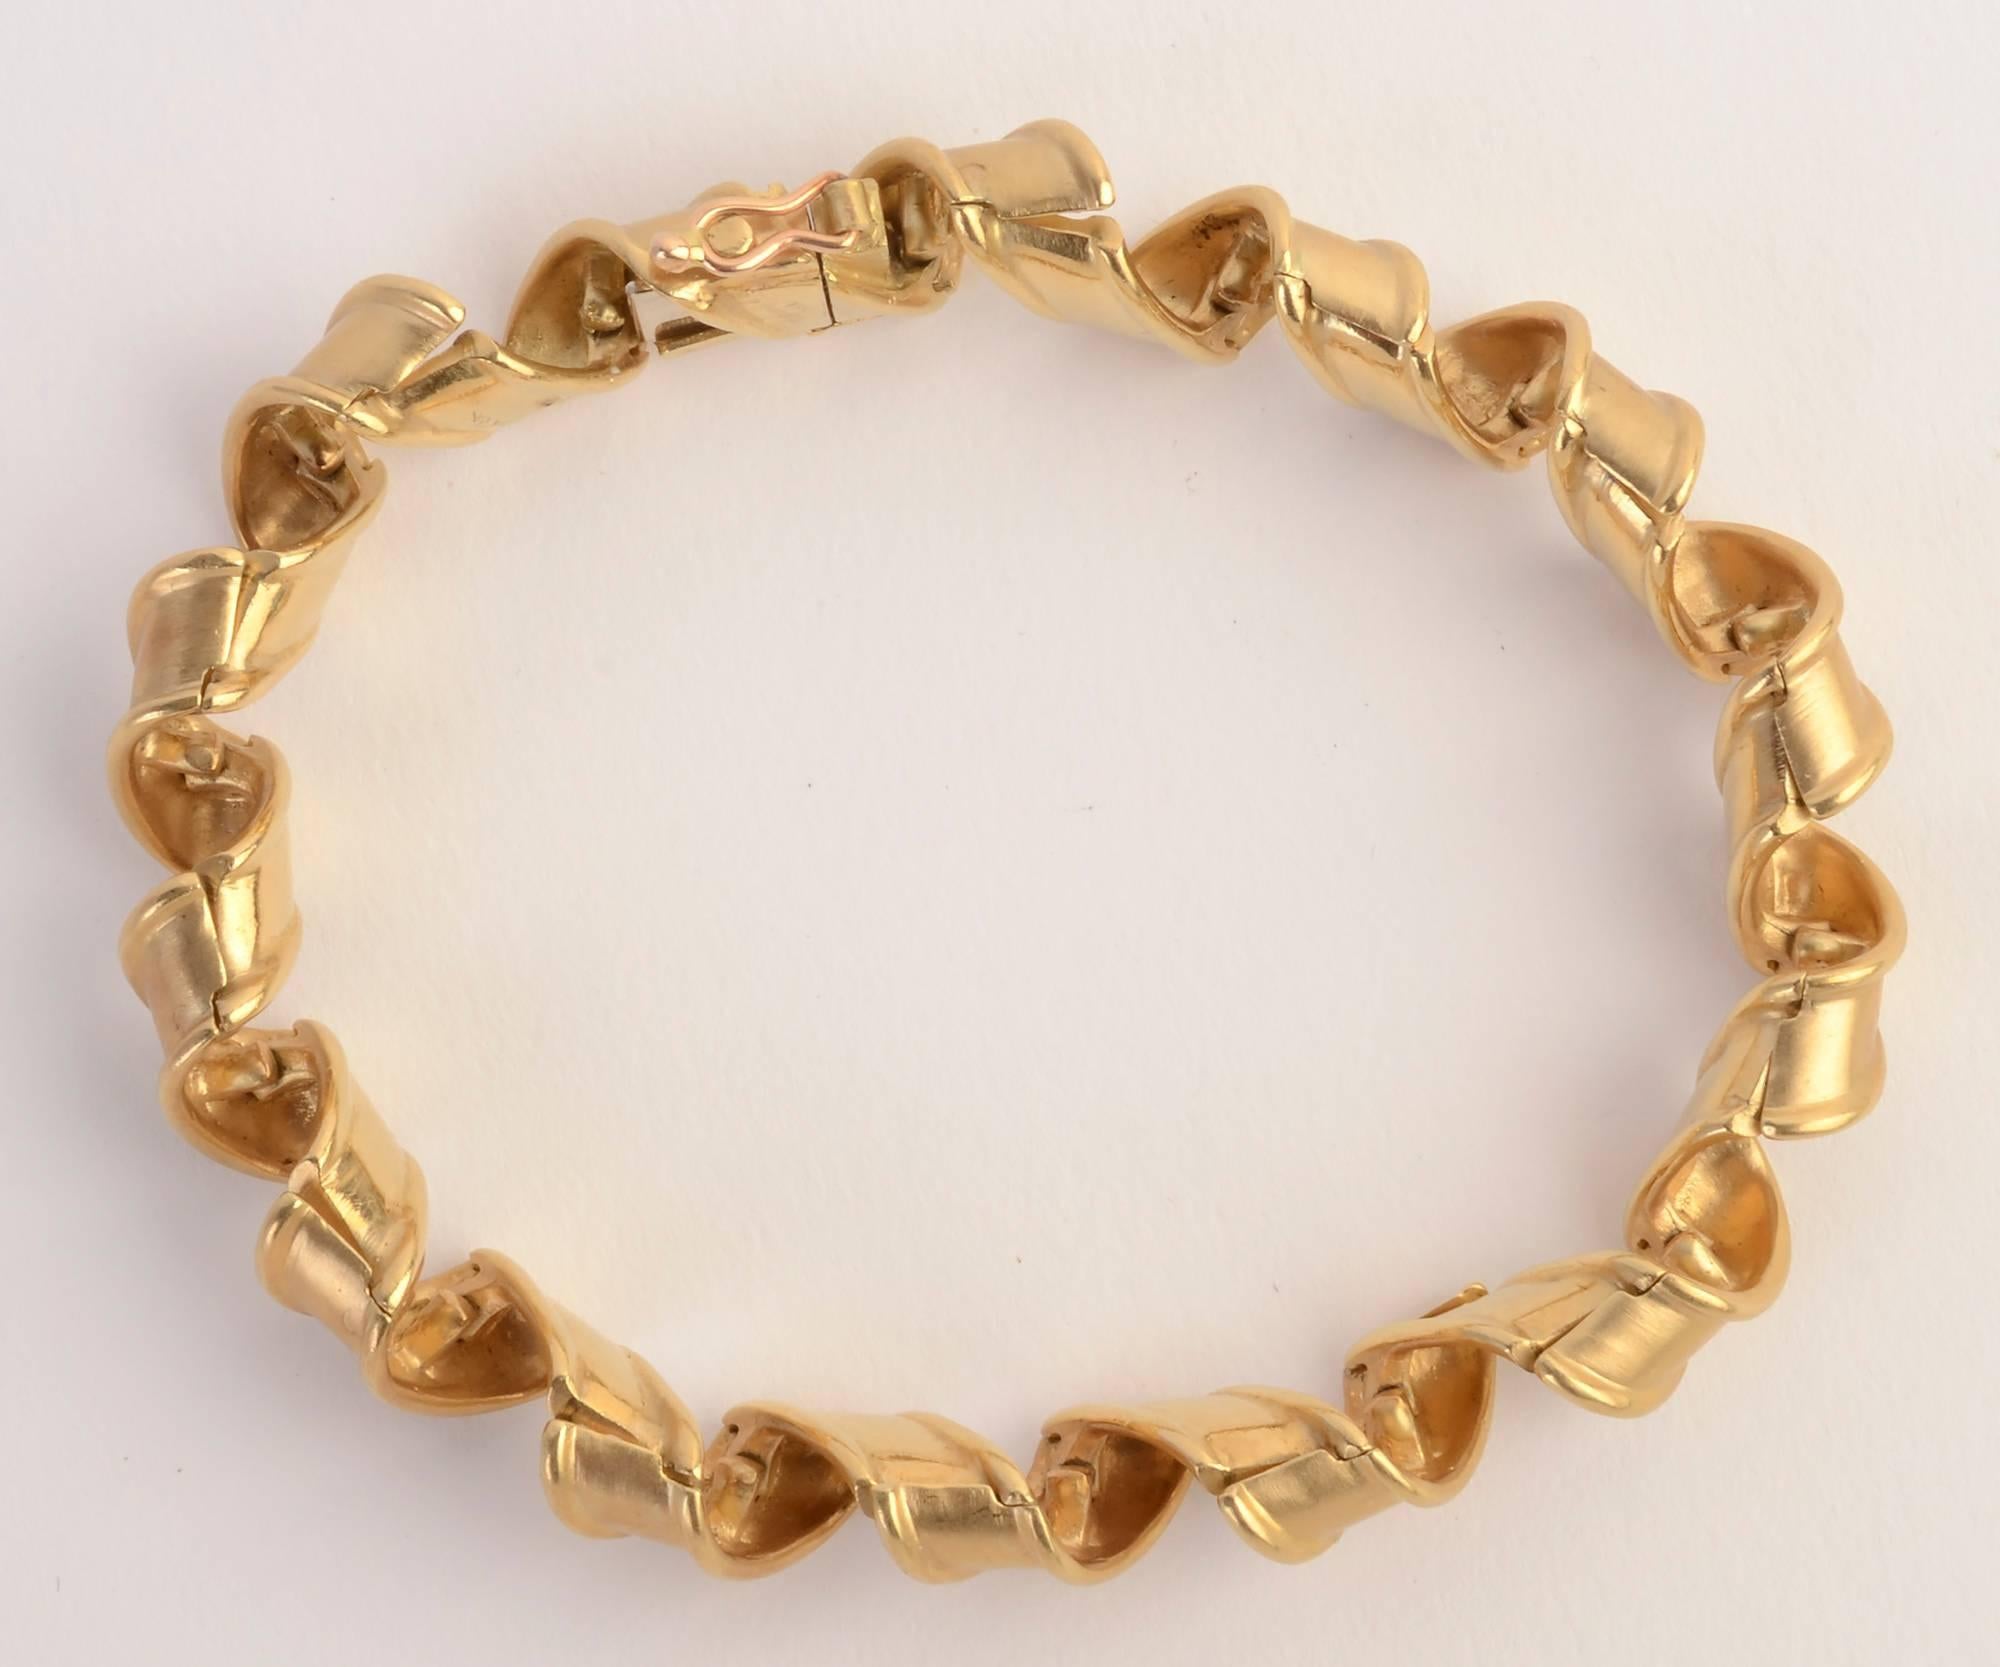 Graceful Tiffany bracelet in which the gold links effectively look like curled ribbon. Each link has two hinges to allow this to occur. The bracelet is 7 1/2 inches in length and half an inch in width. Made in France; circa 1960's.